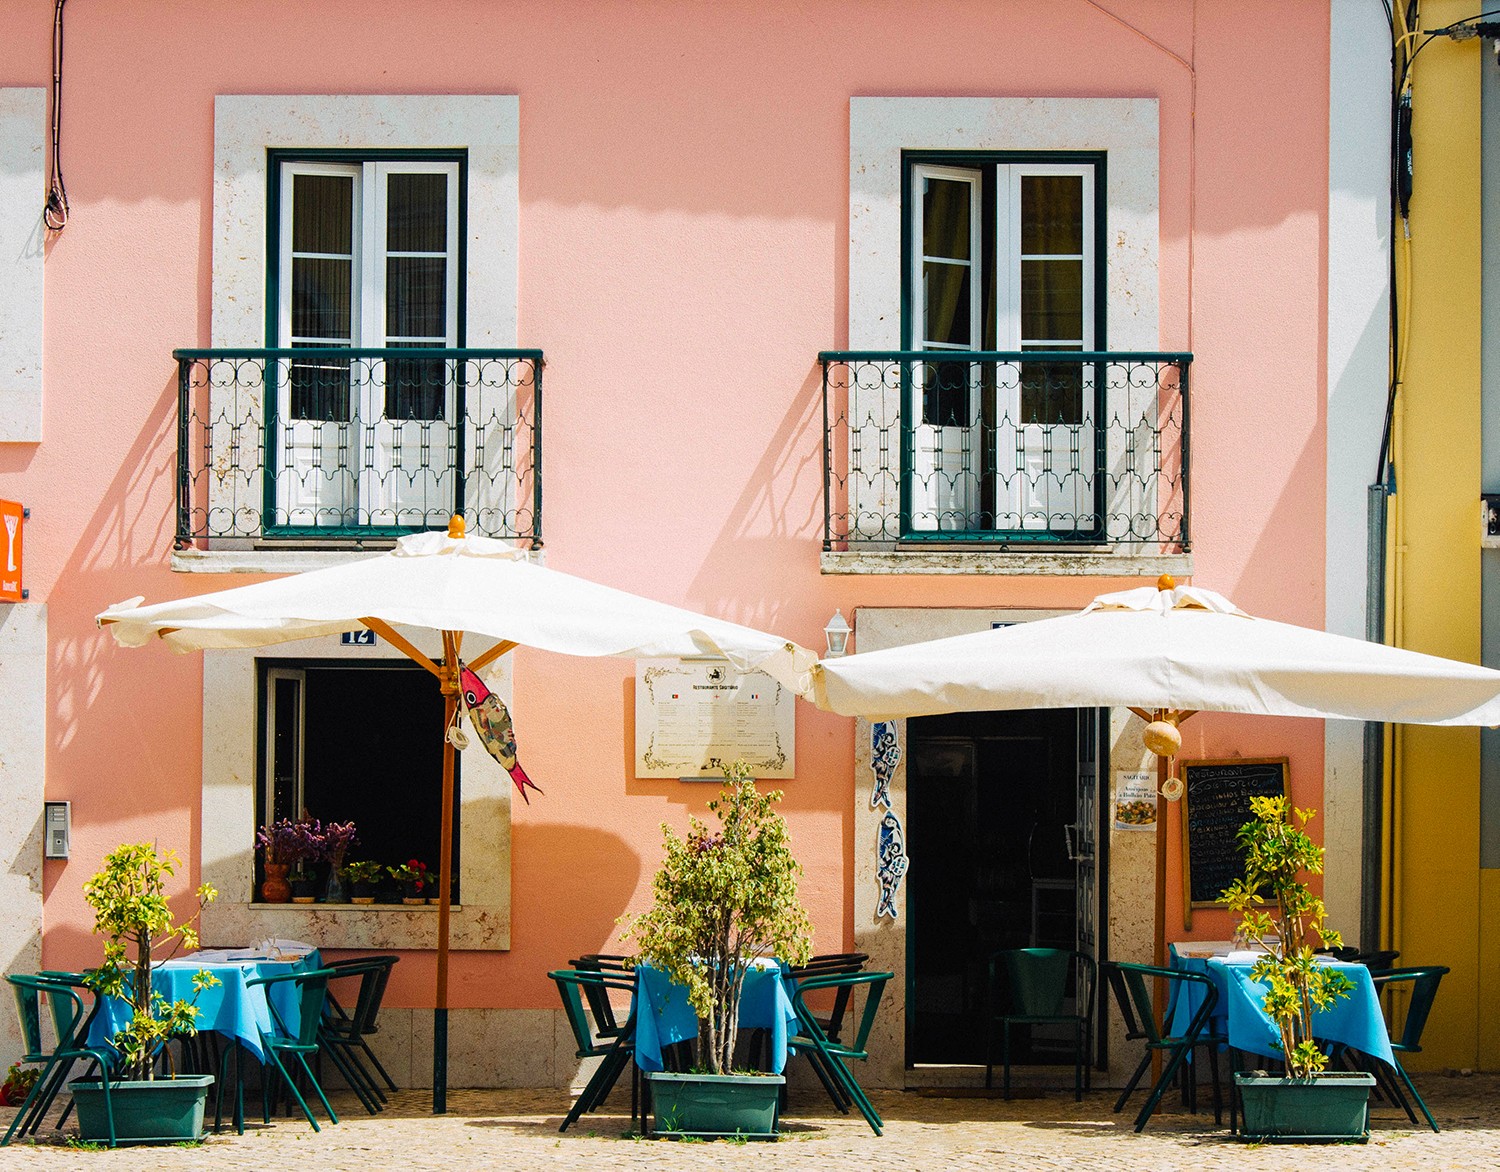 A Local’s Guide to Lisbon